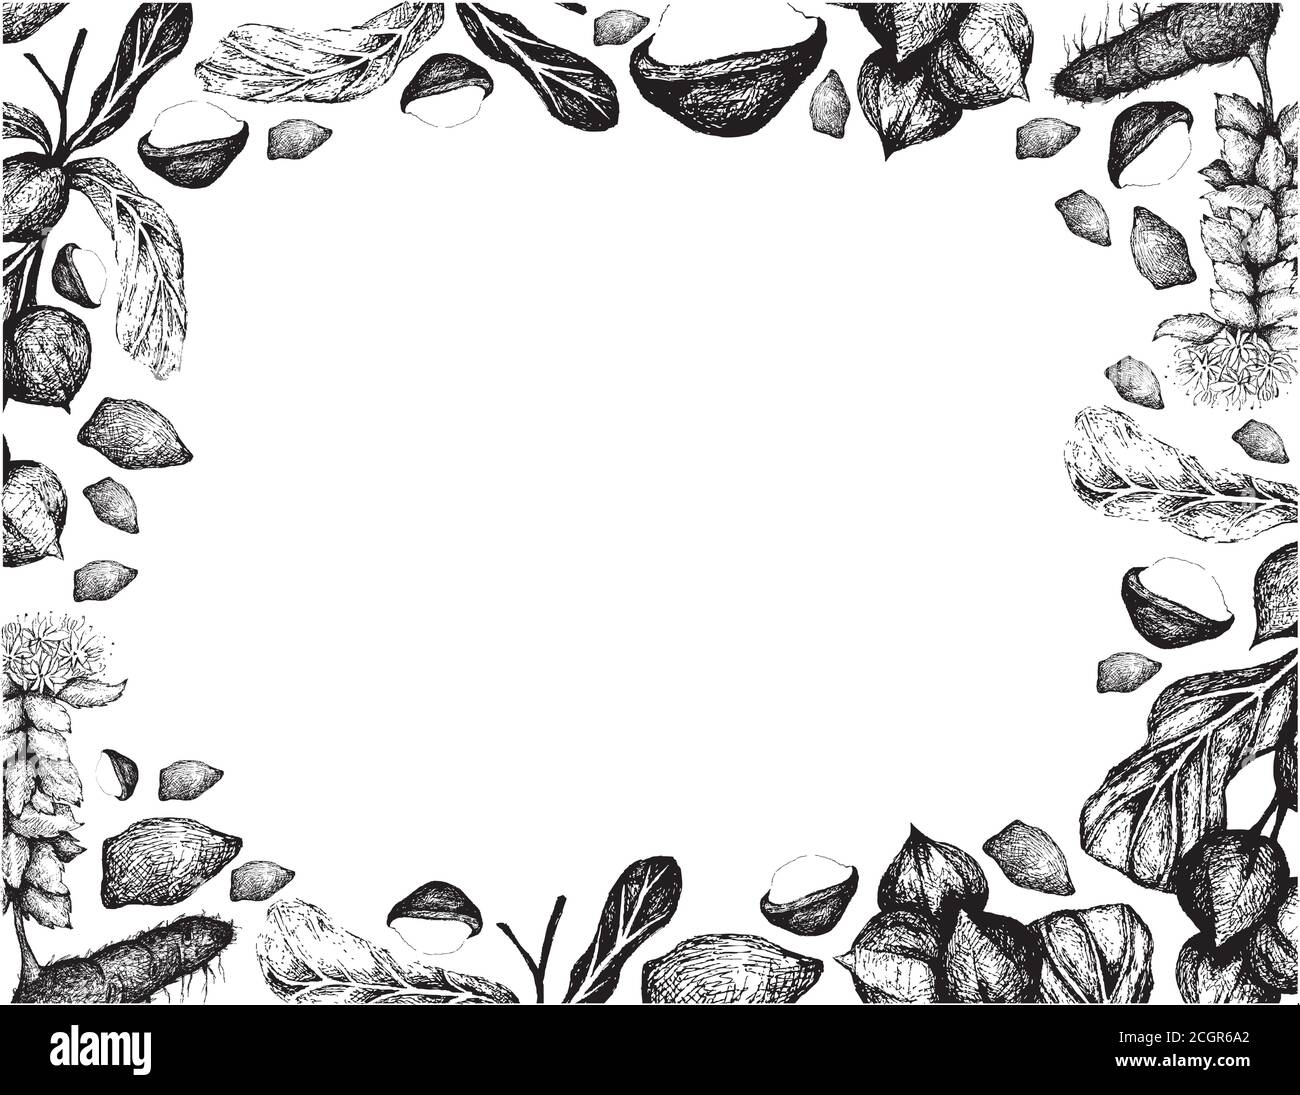 Nut and Bean, Hand Drawn Illustration Sketch of Shelled and Unshelled Macadamia Nuts with Rhodiola Rosea, Aaron's Rod, King's Crown, Lignum Rhodium or Stock Vector